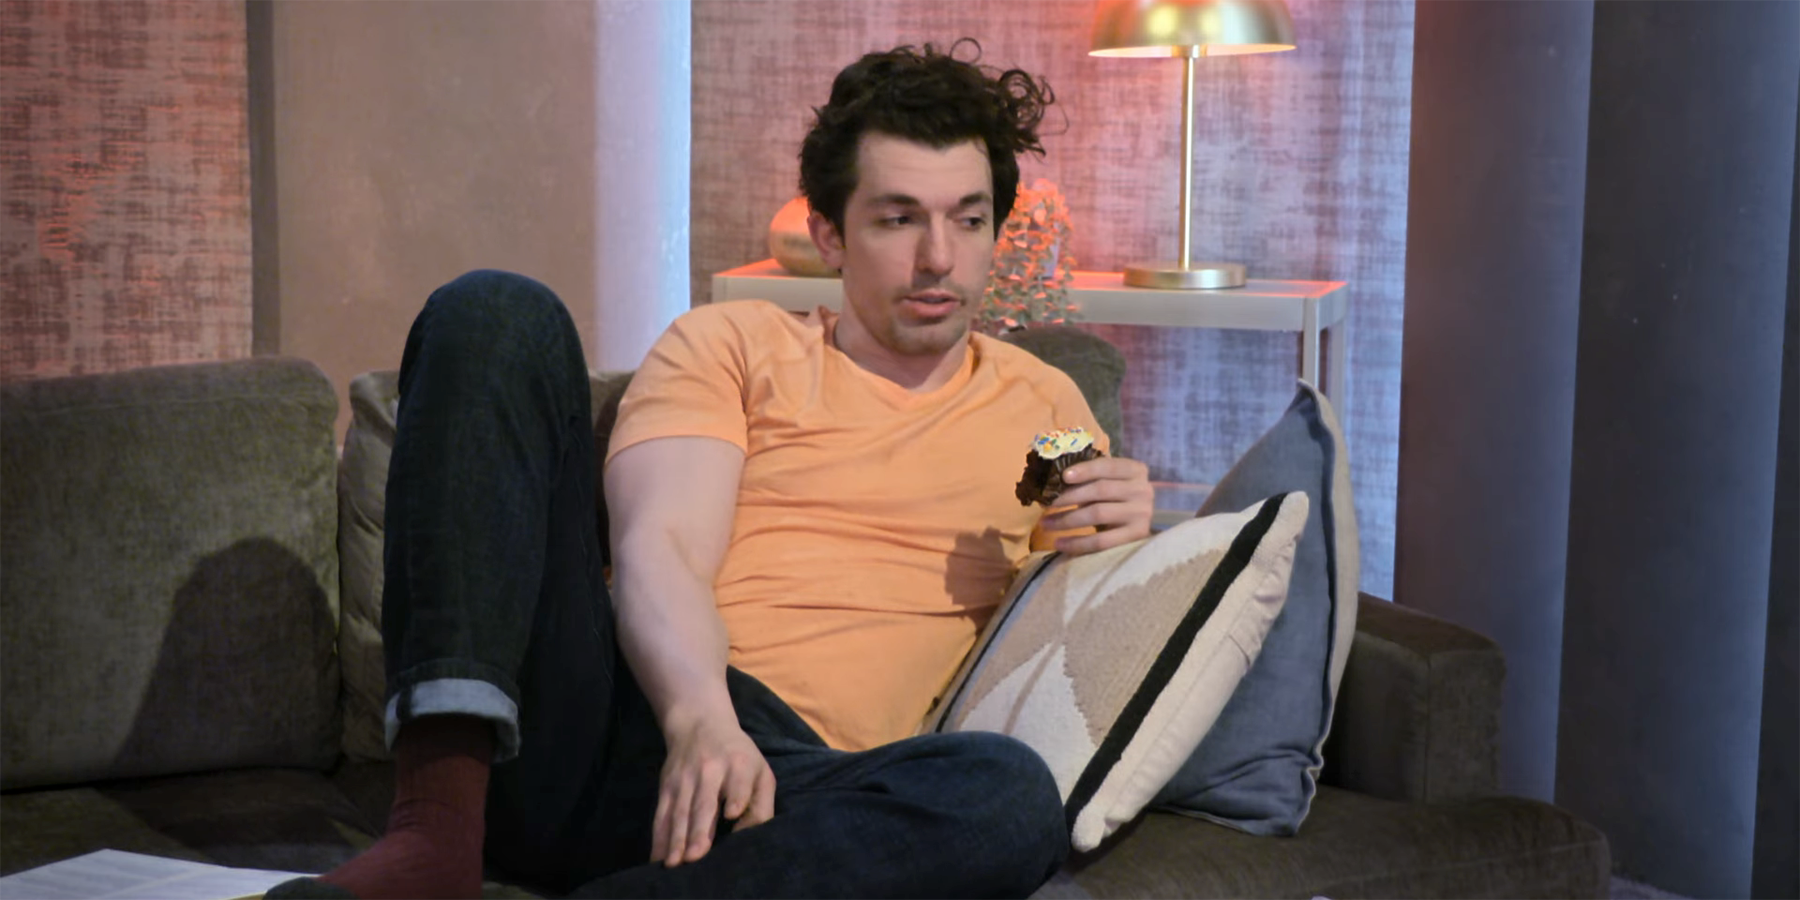 Zack Goytowski from Love Is Blind Season 4 is sitting on the couch eating cupcakes